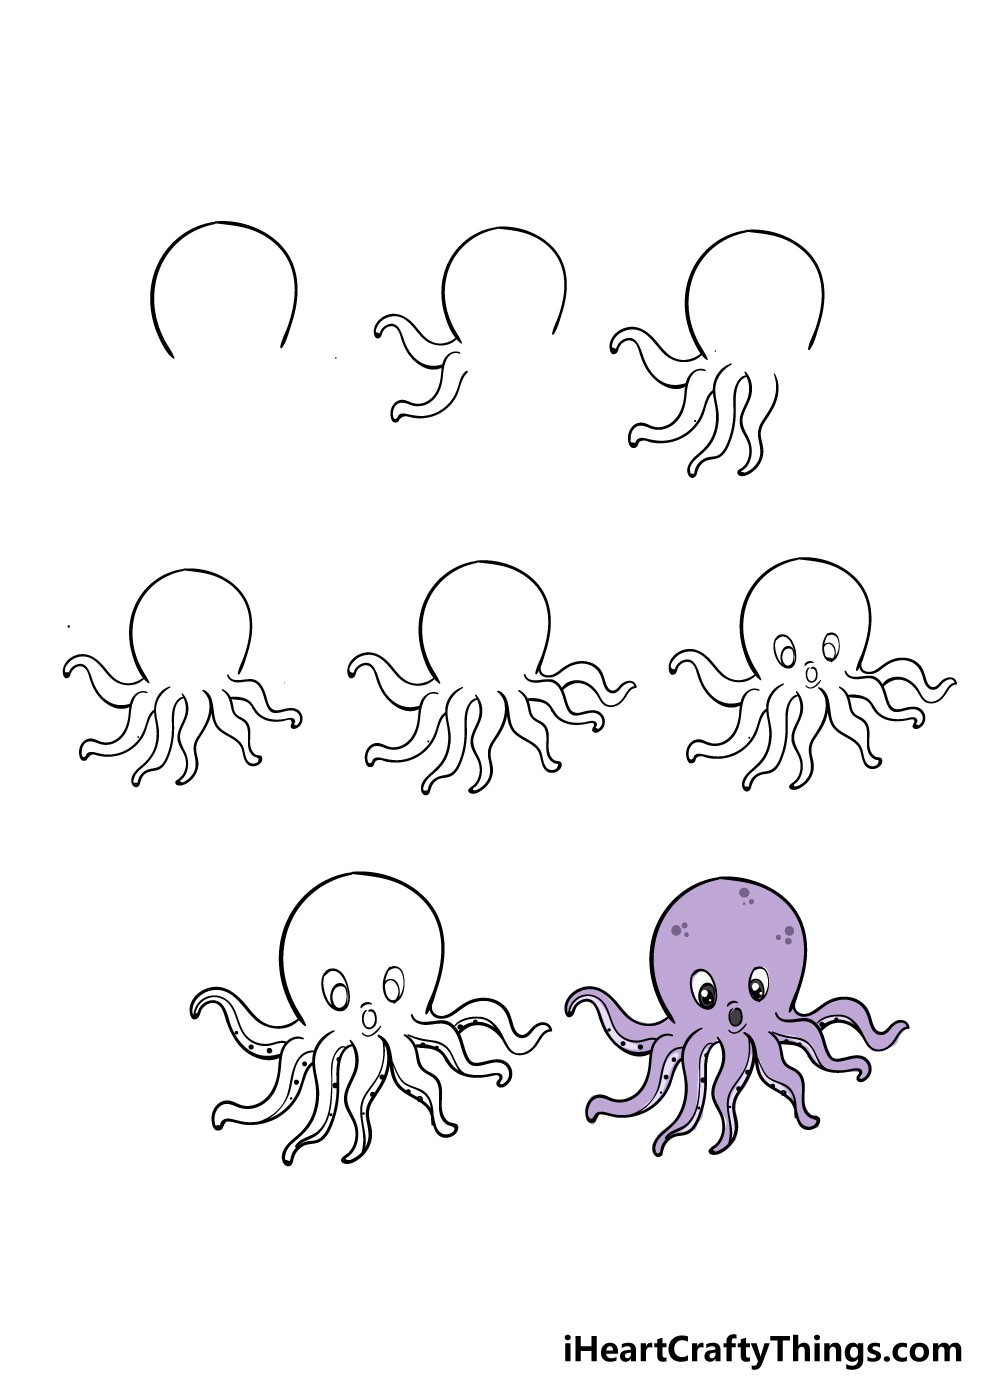 How to draw A simple octopus